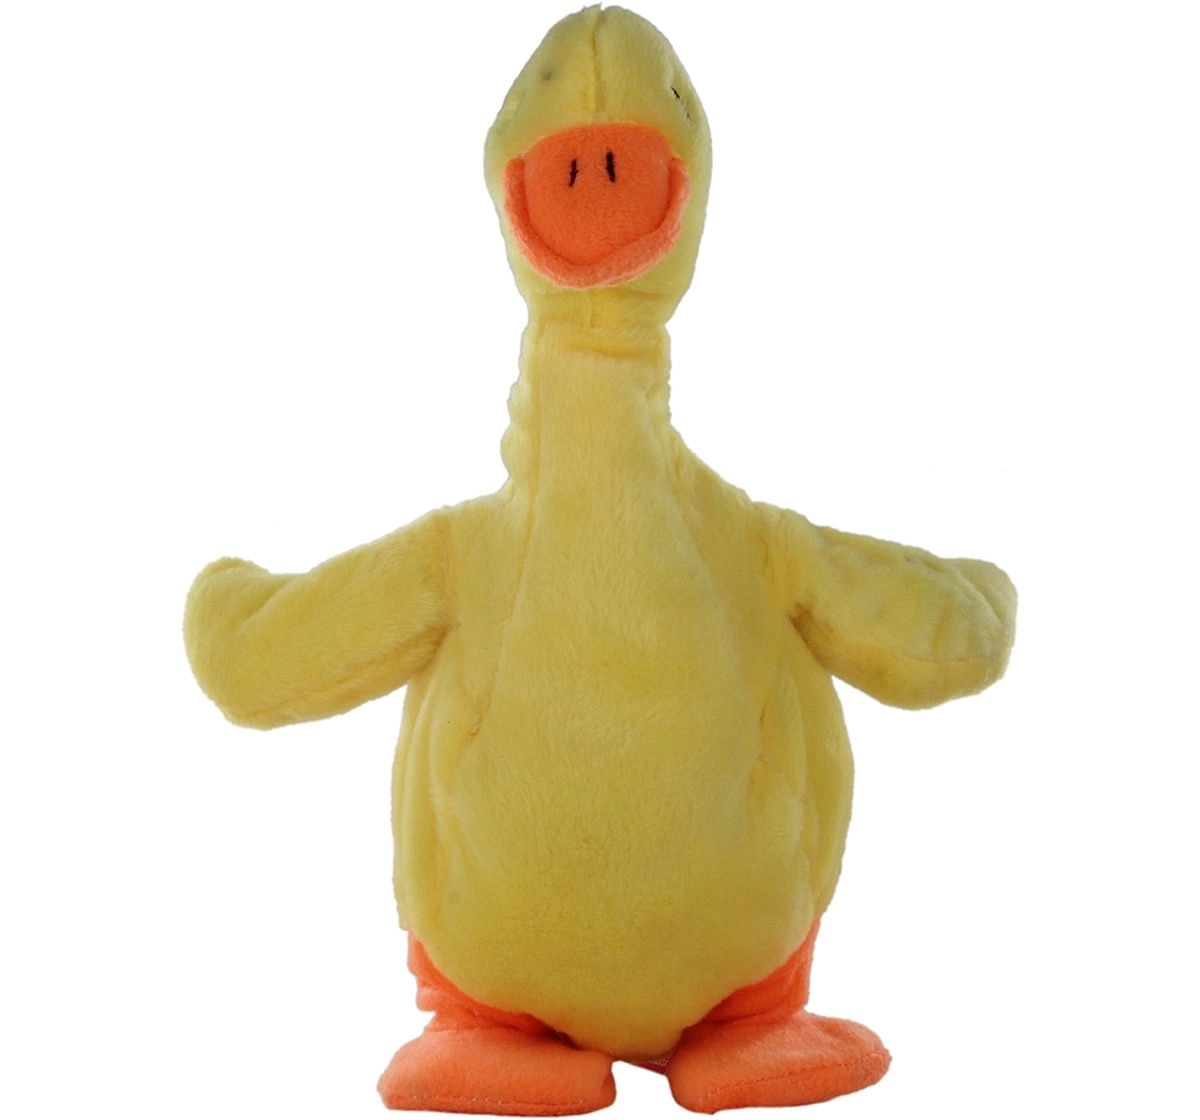  Hamleys Movers & Shakers -  Duck  Interactive Soft Toys for Kids age 3Y+ - 12 Cm (Yellow)